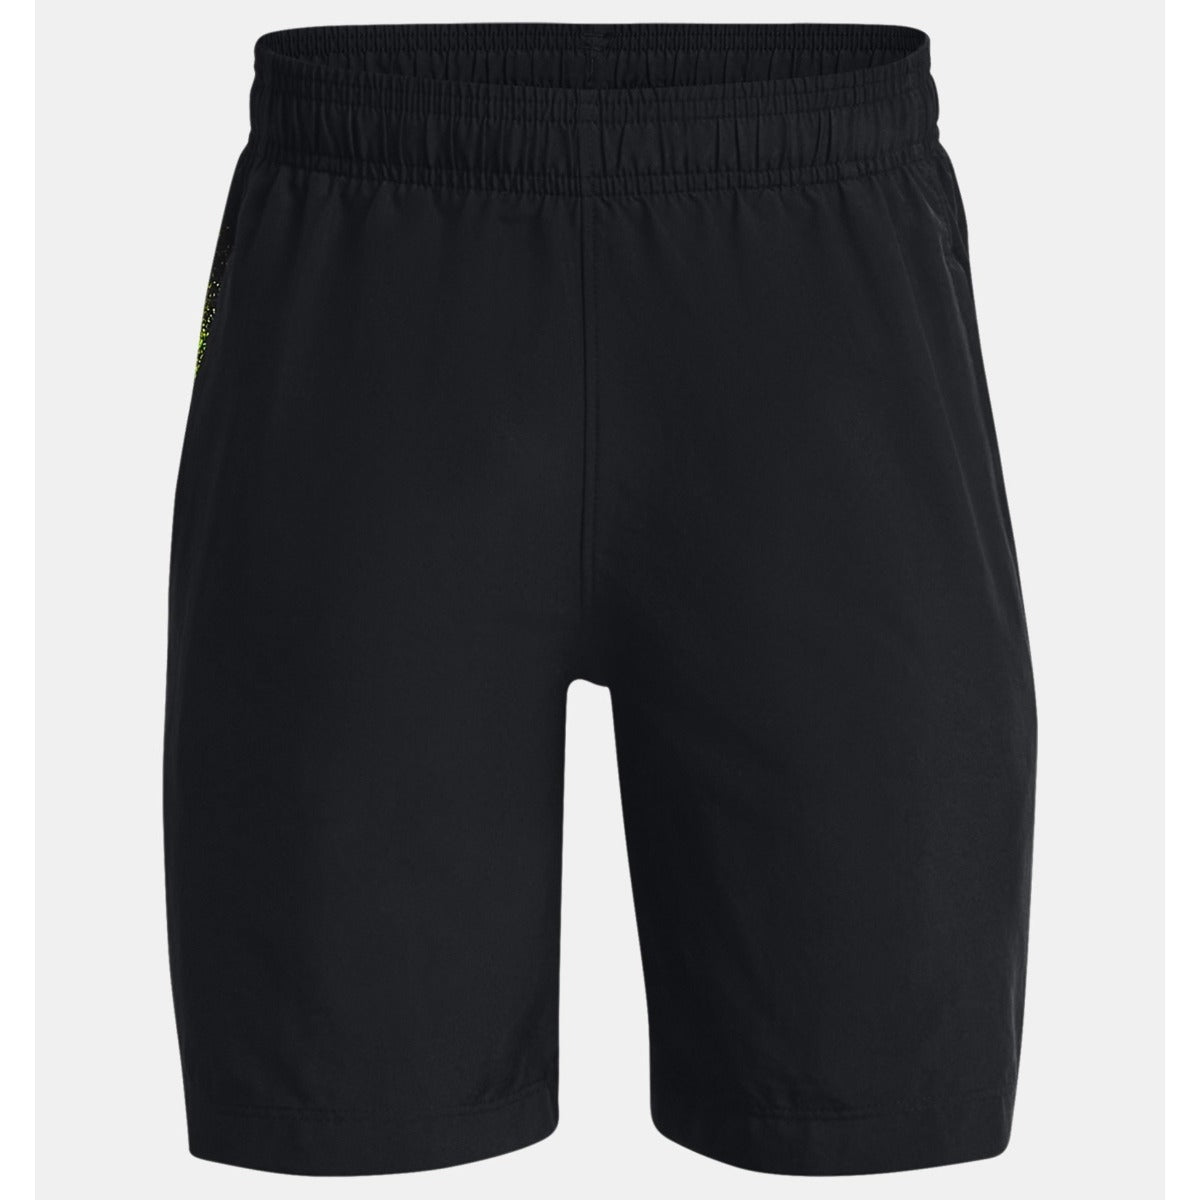 Under Armour Woven Graphic Shorts Boys